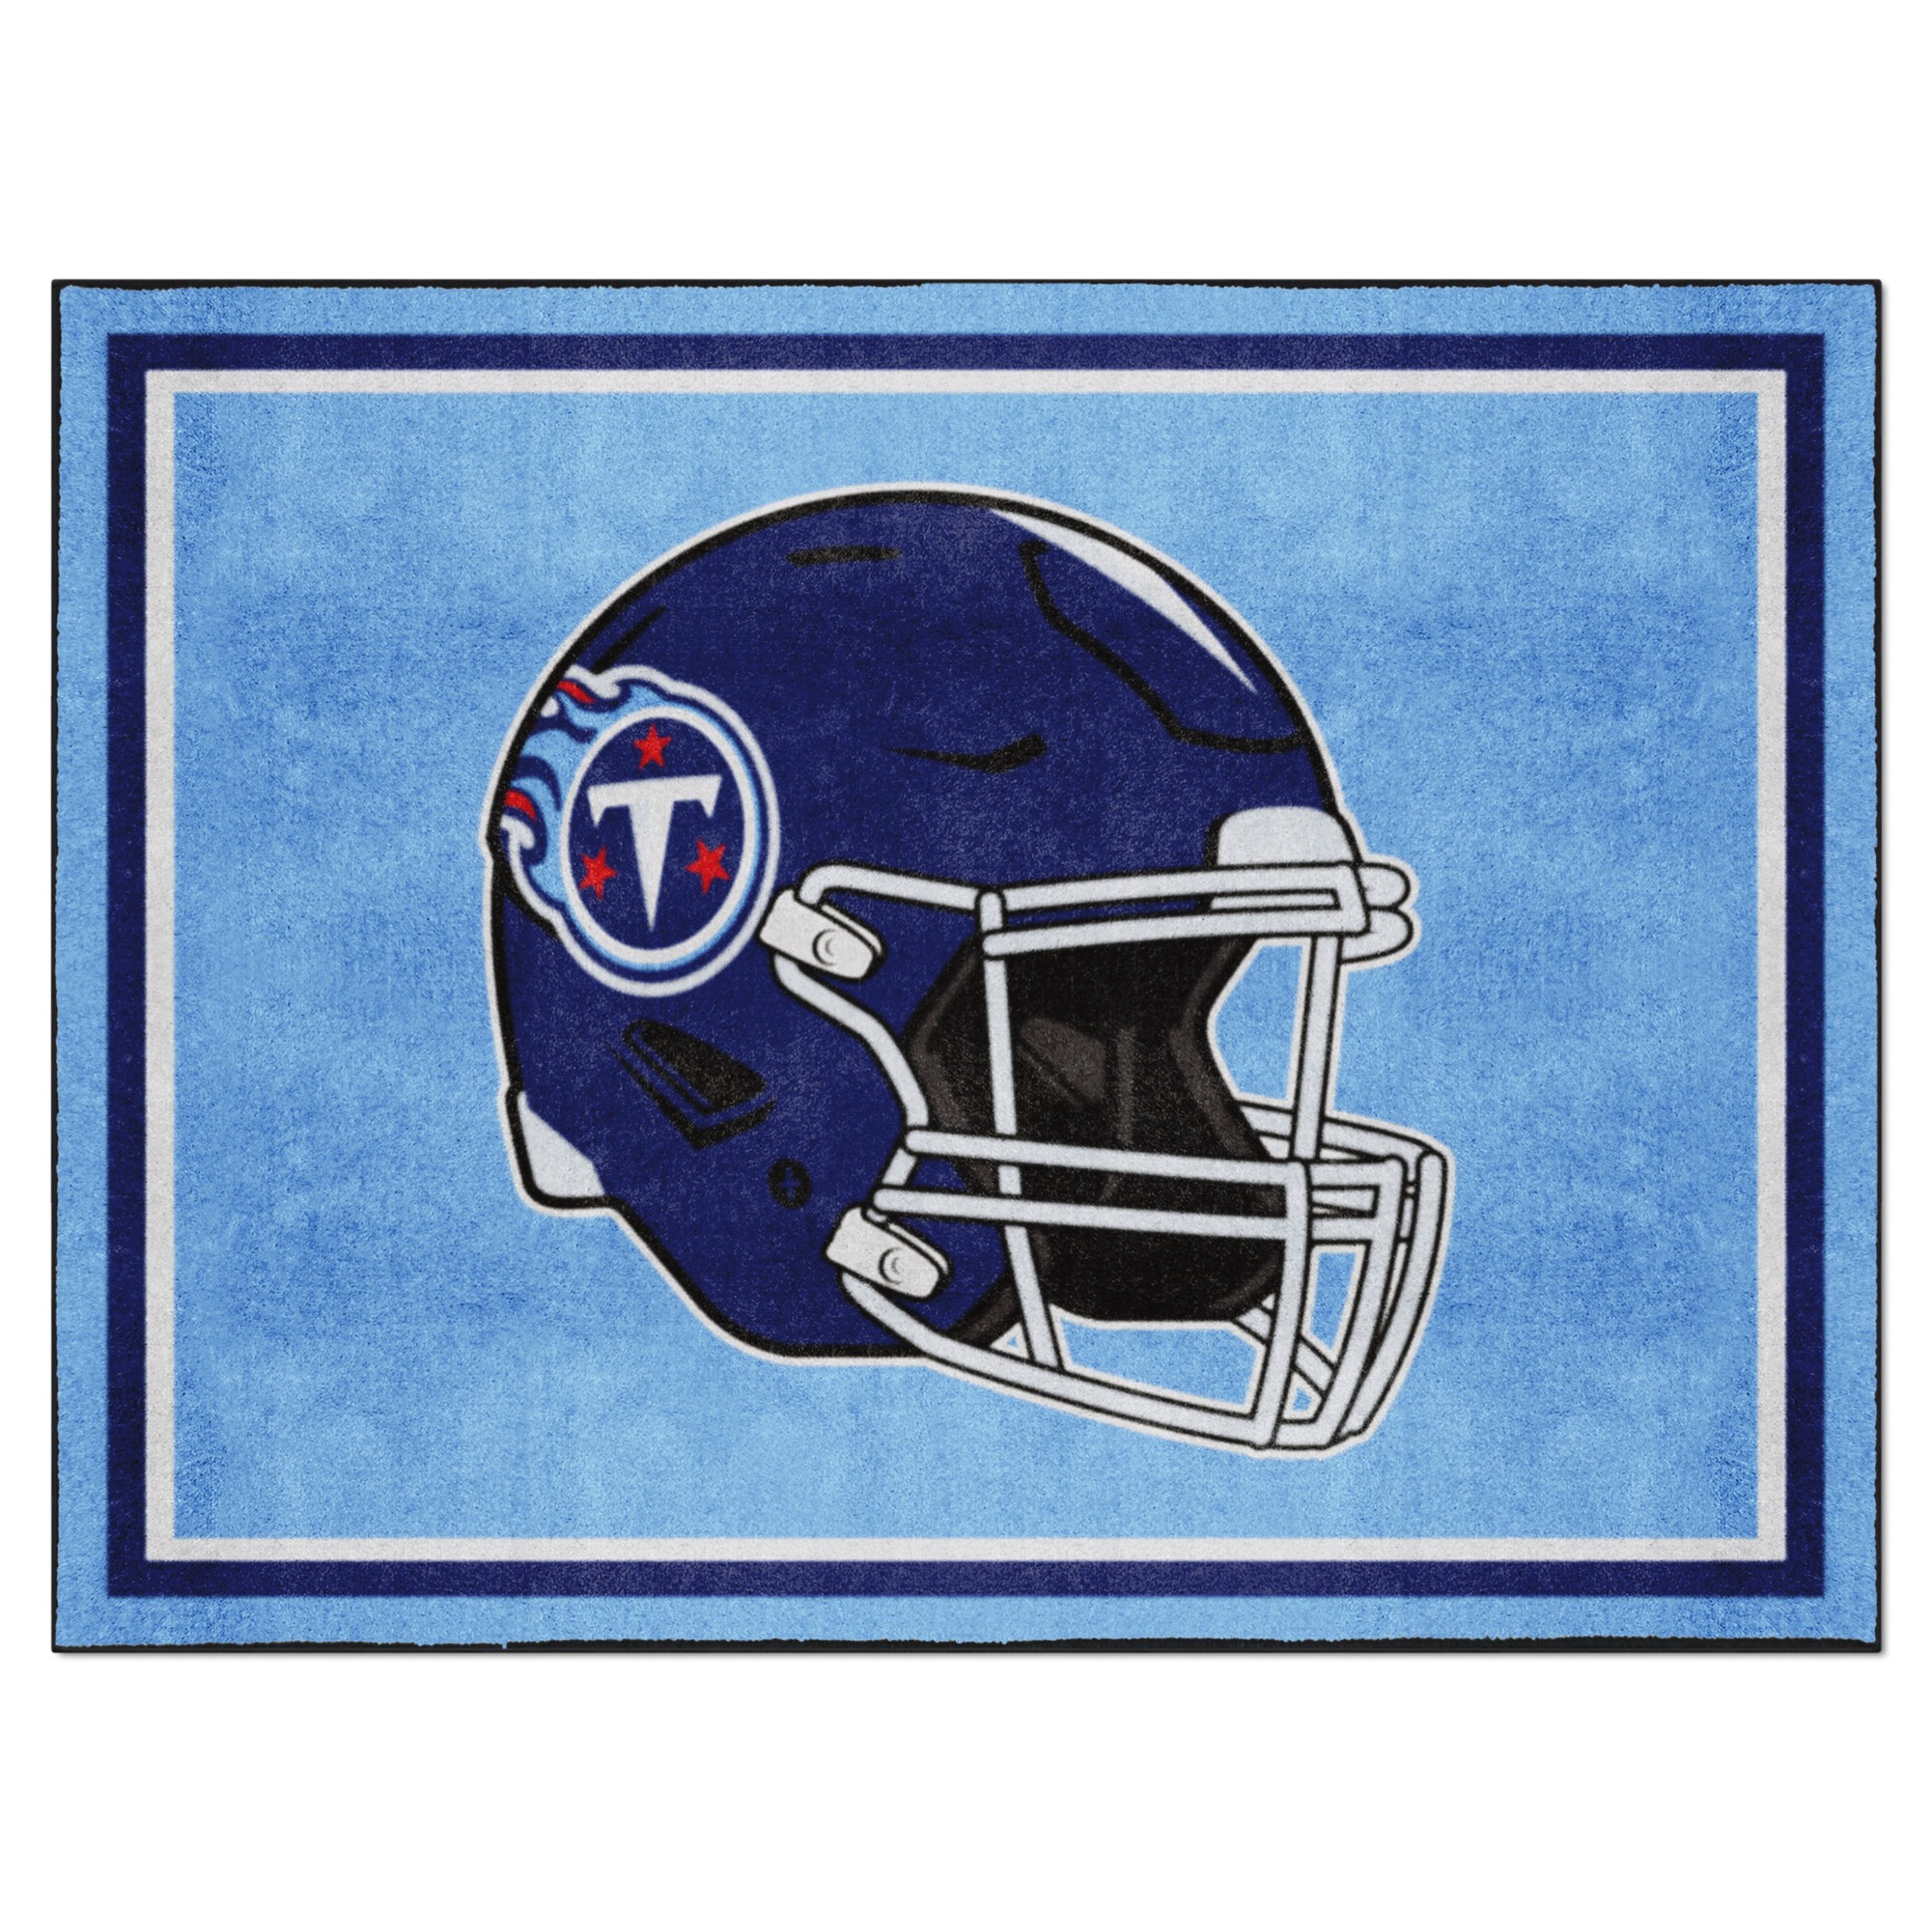 Tennessee Titans show off new uniforms